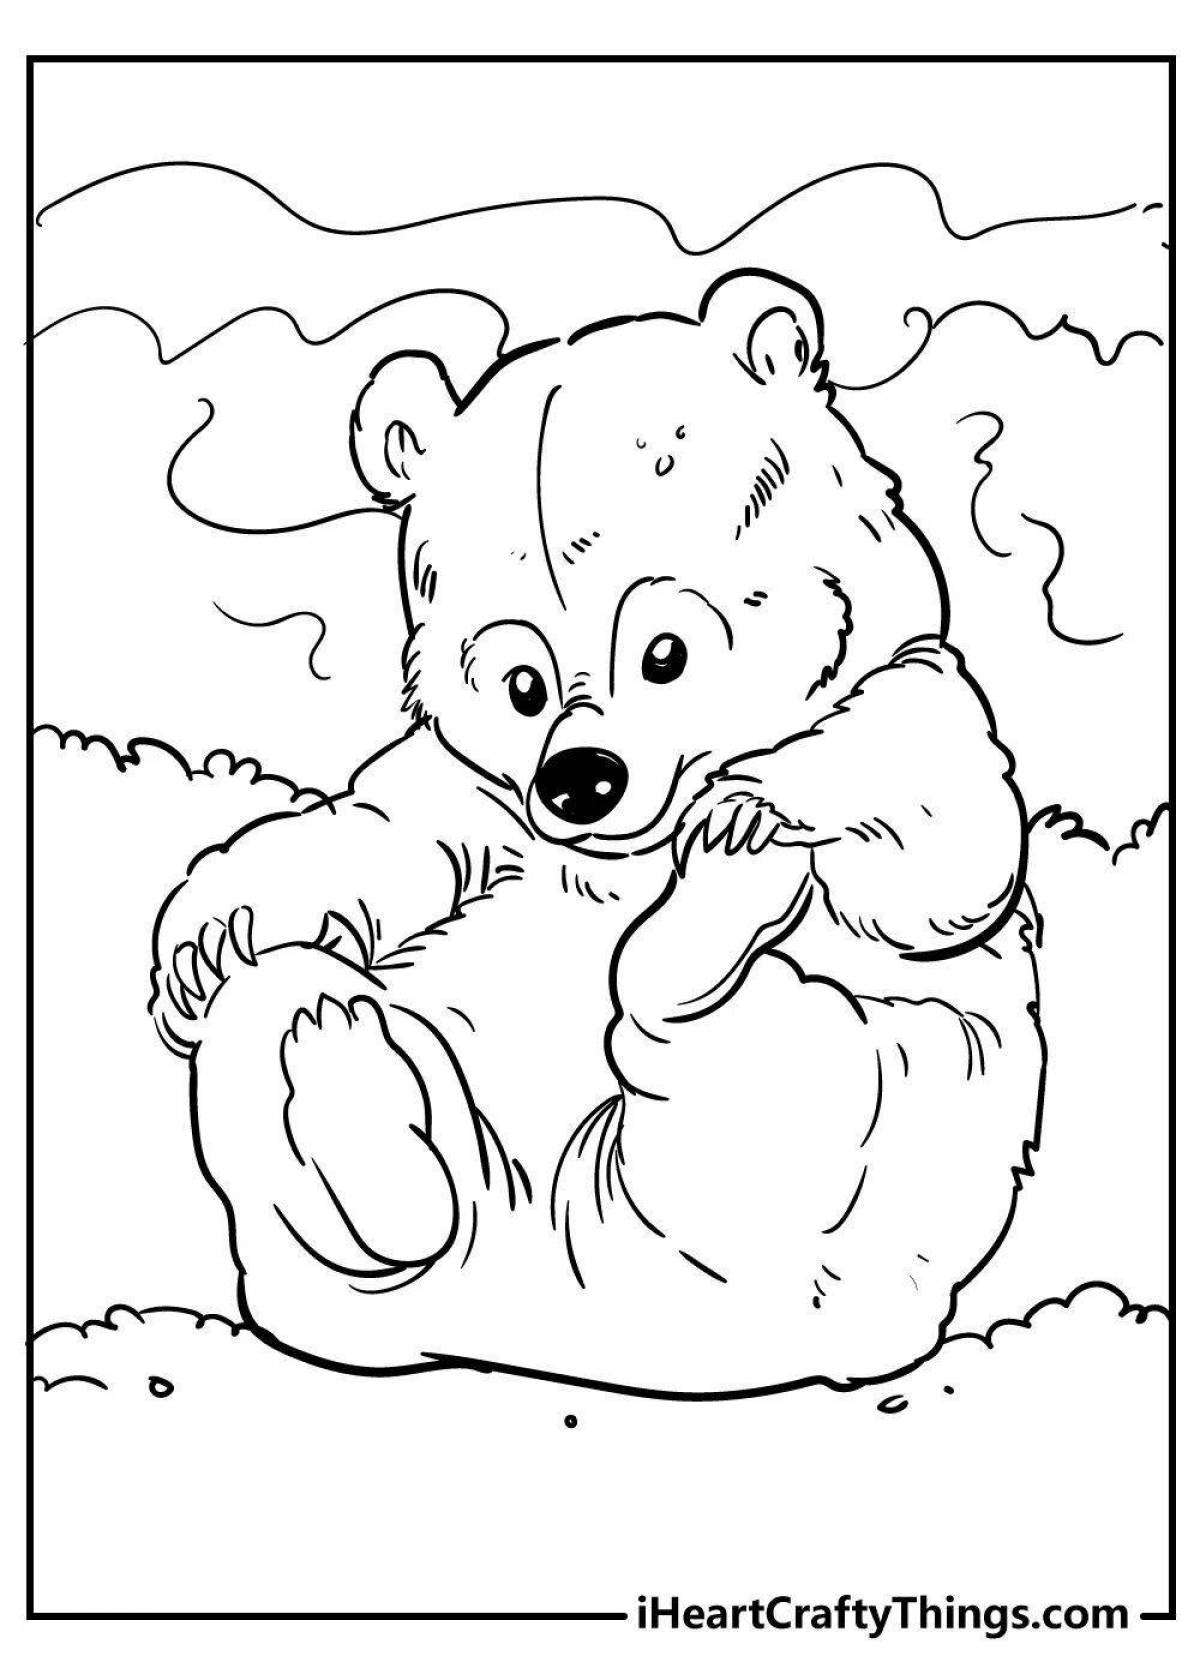 Live polar bear coloring for children 5-6 years old